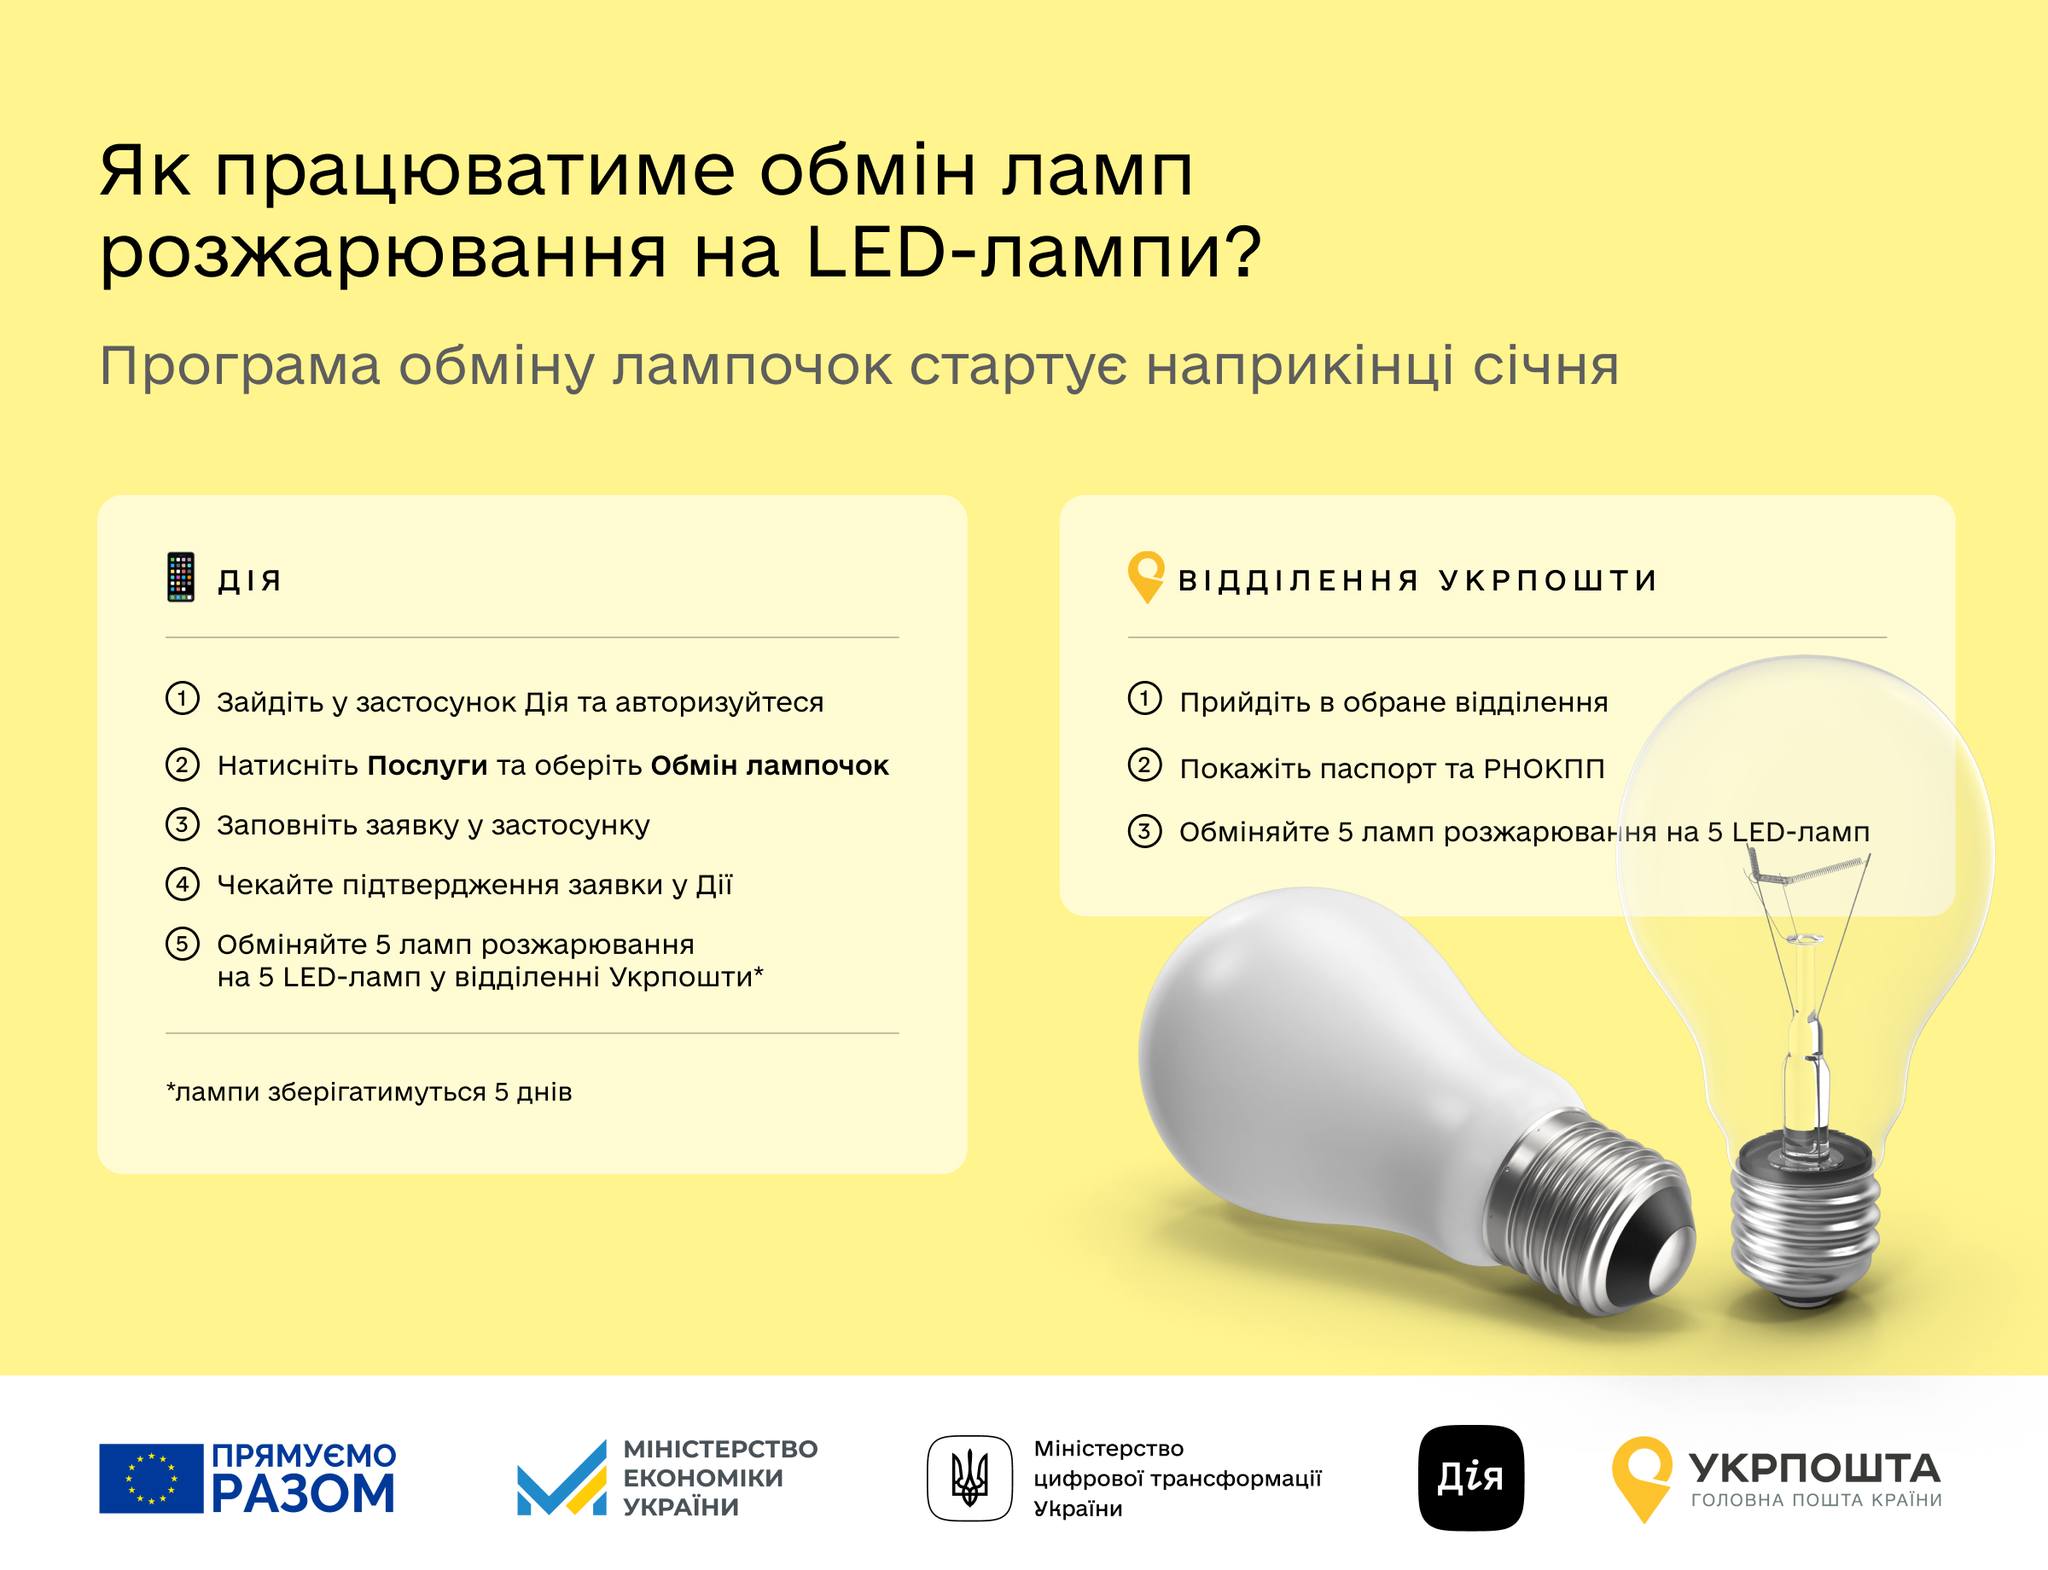 Diya has started accepting applications for the exchange of old incandescent lamps for LED lamps - the first batches will go to regional centers